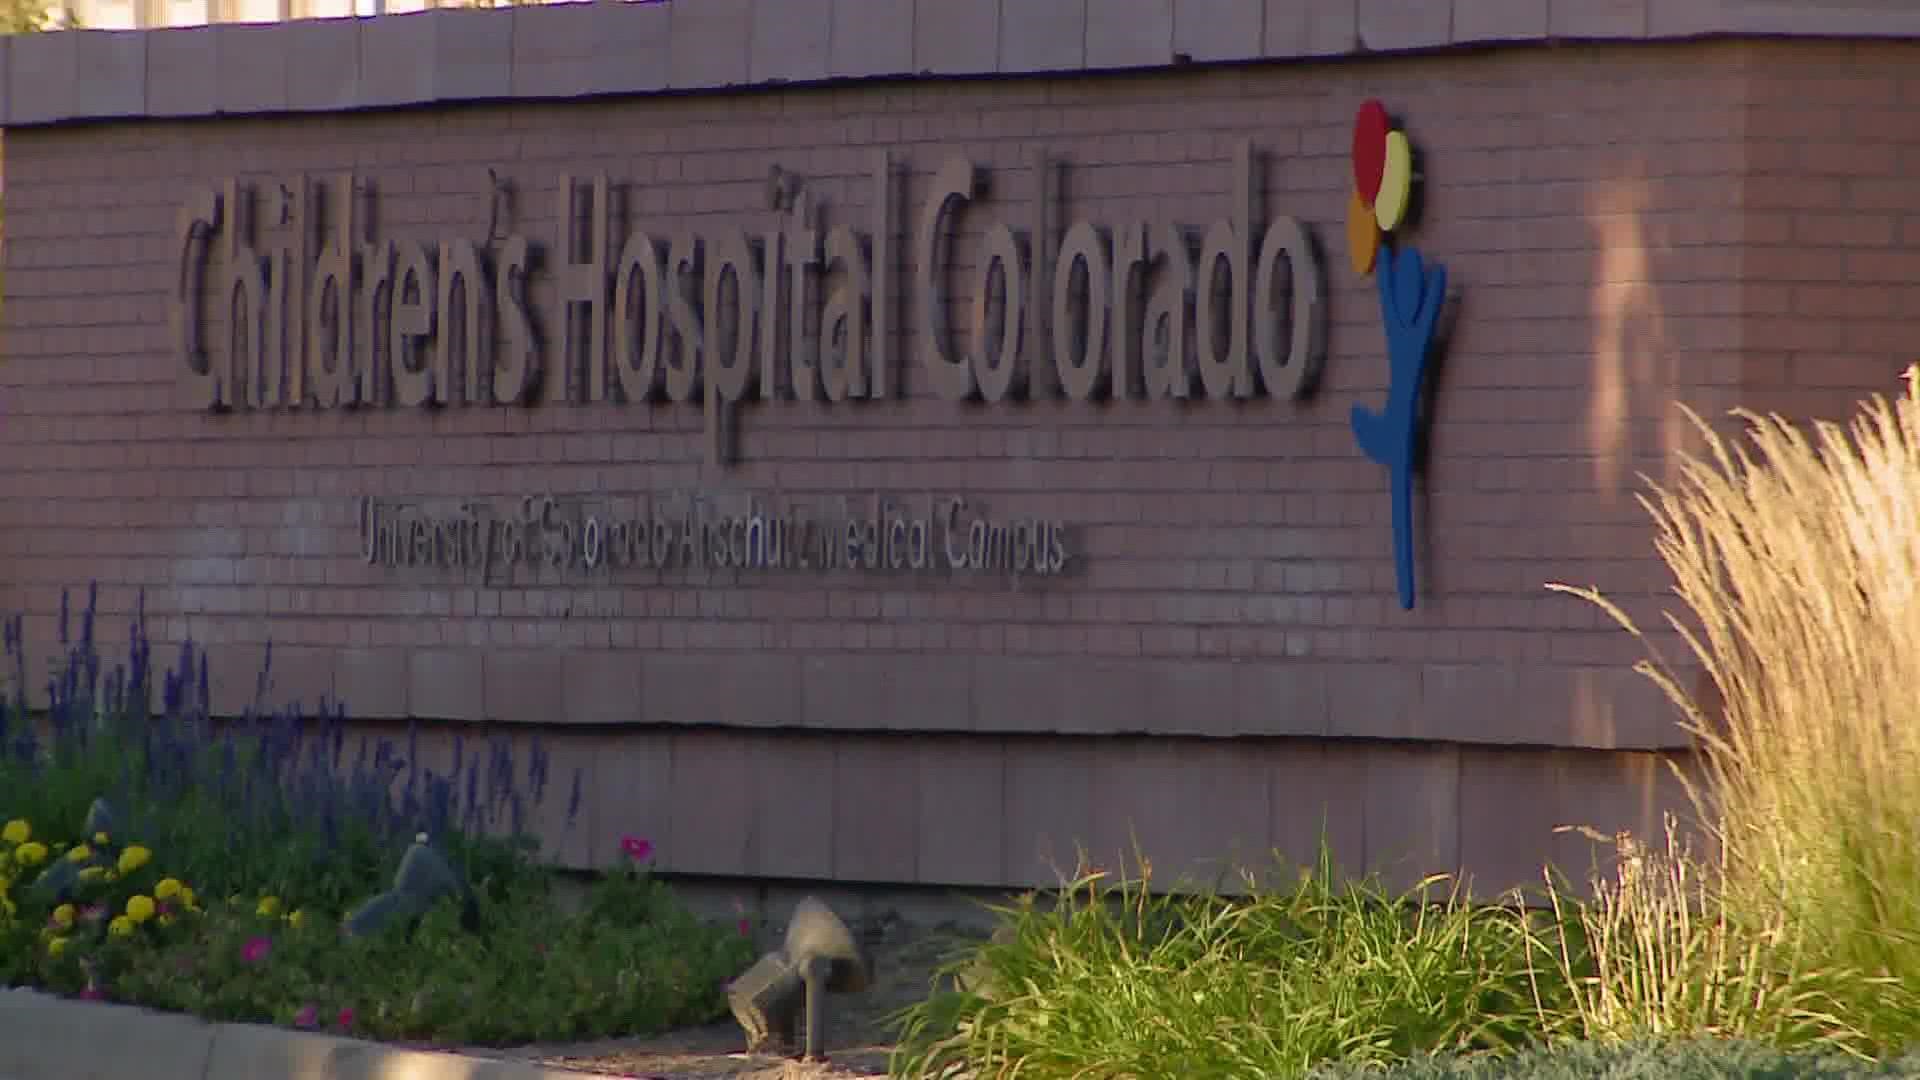 According to Children's Hospital of Colorado, the incident happened overnight. No one was hurt.